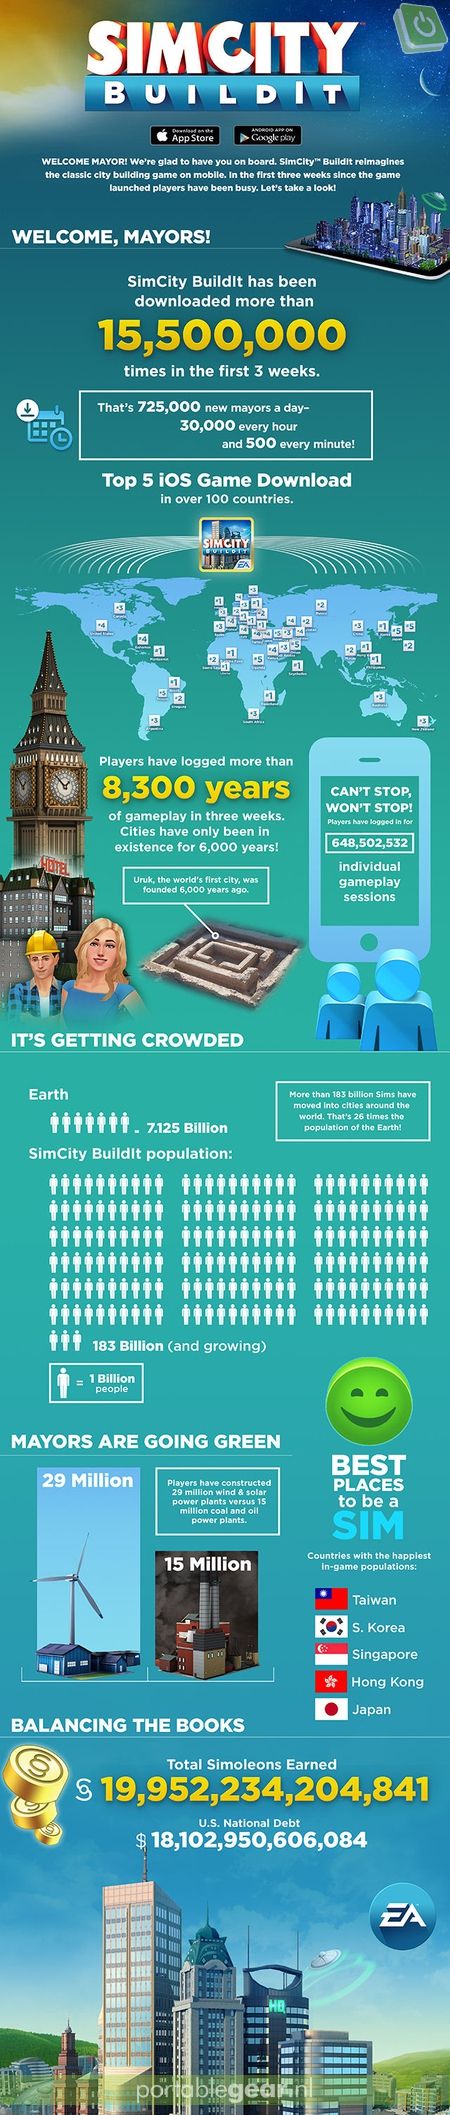 SimCity BuildIt Infographic
